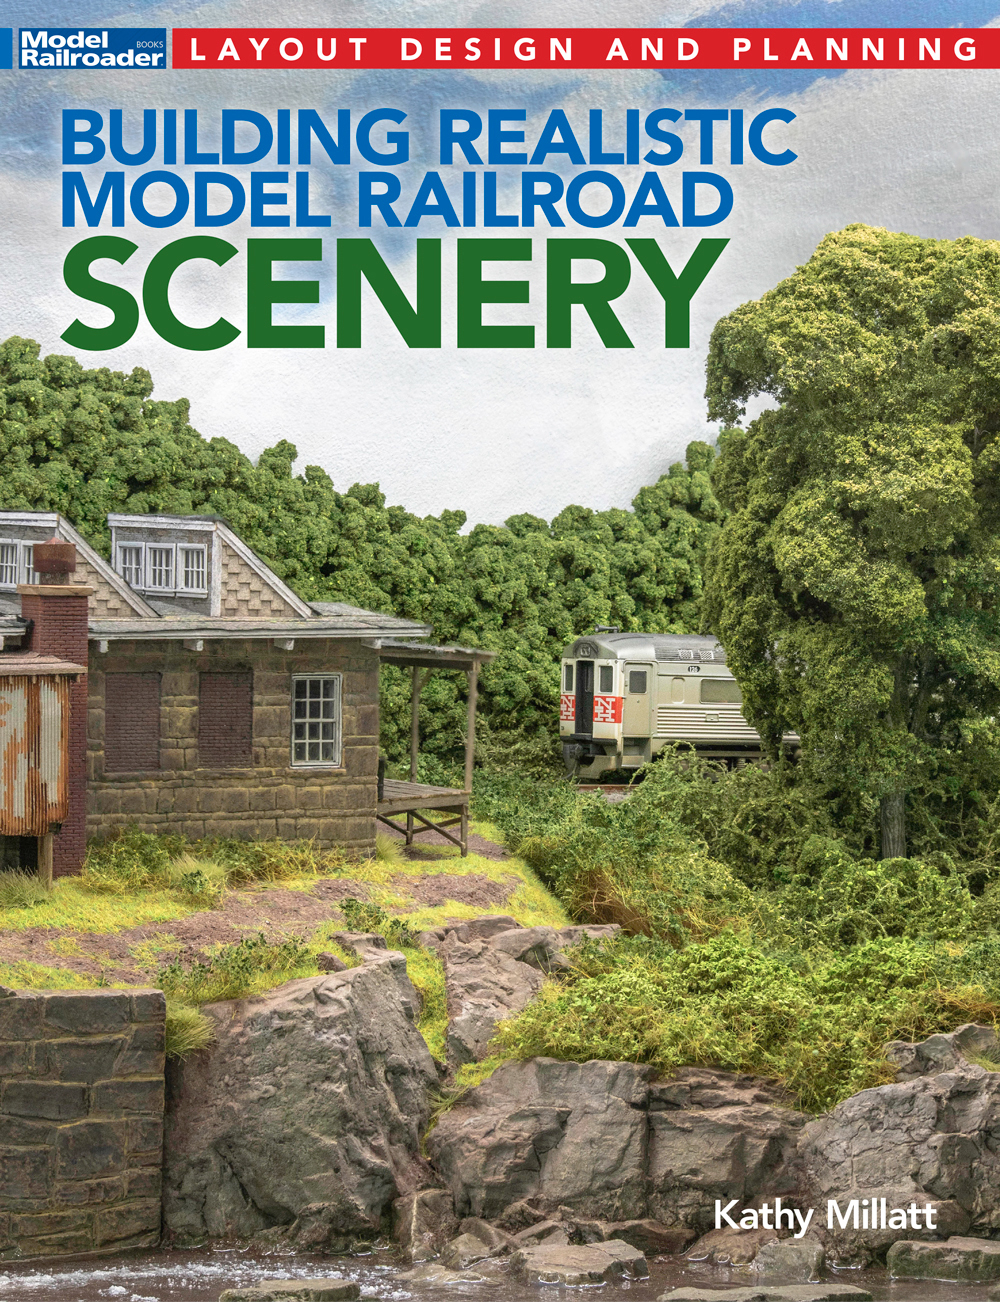 Cover image of book with self-propelled railcar passing structure with trees, grass, and rocks in foreground.